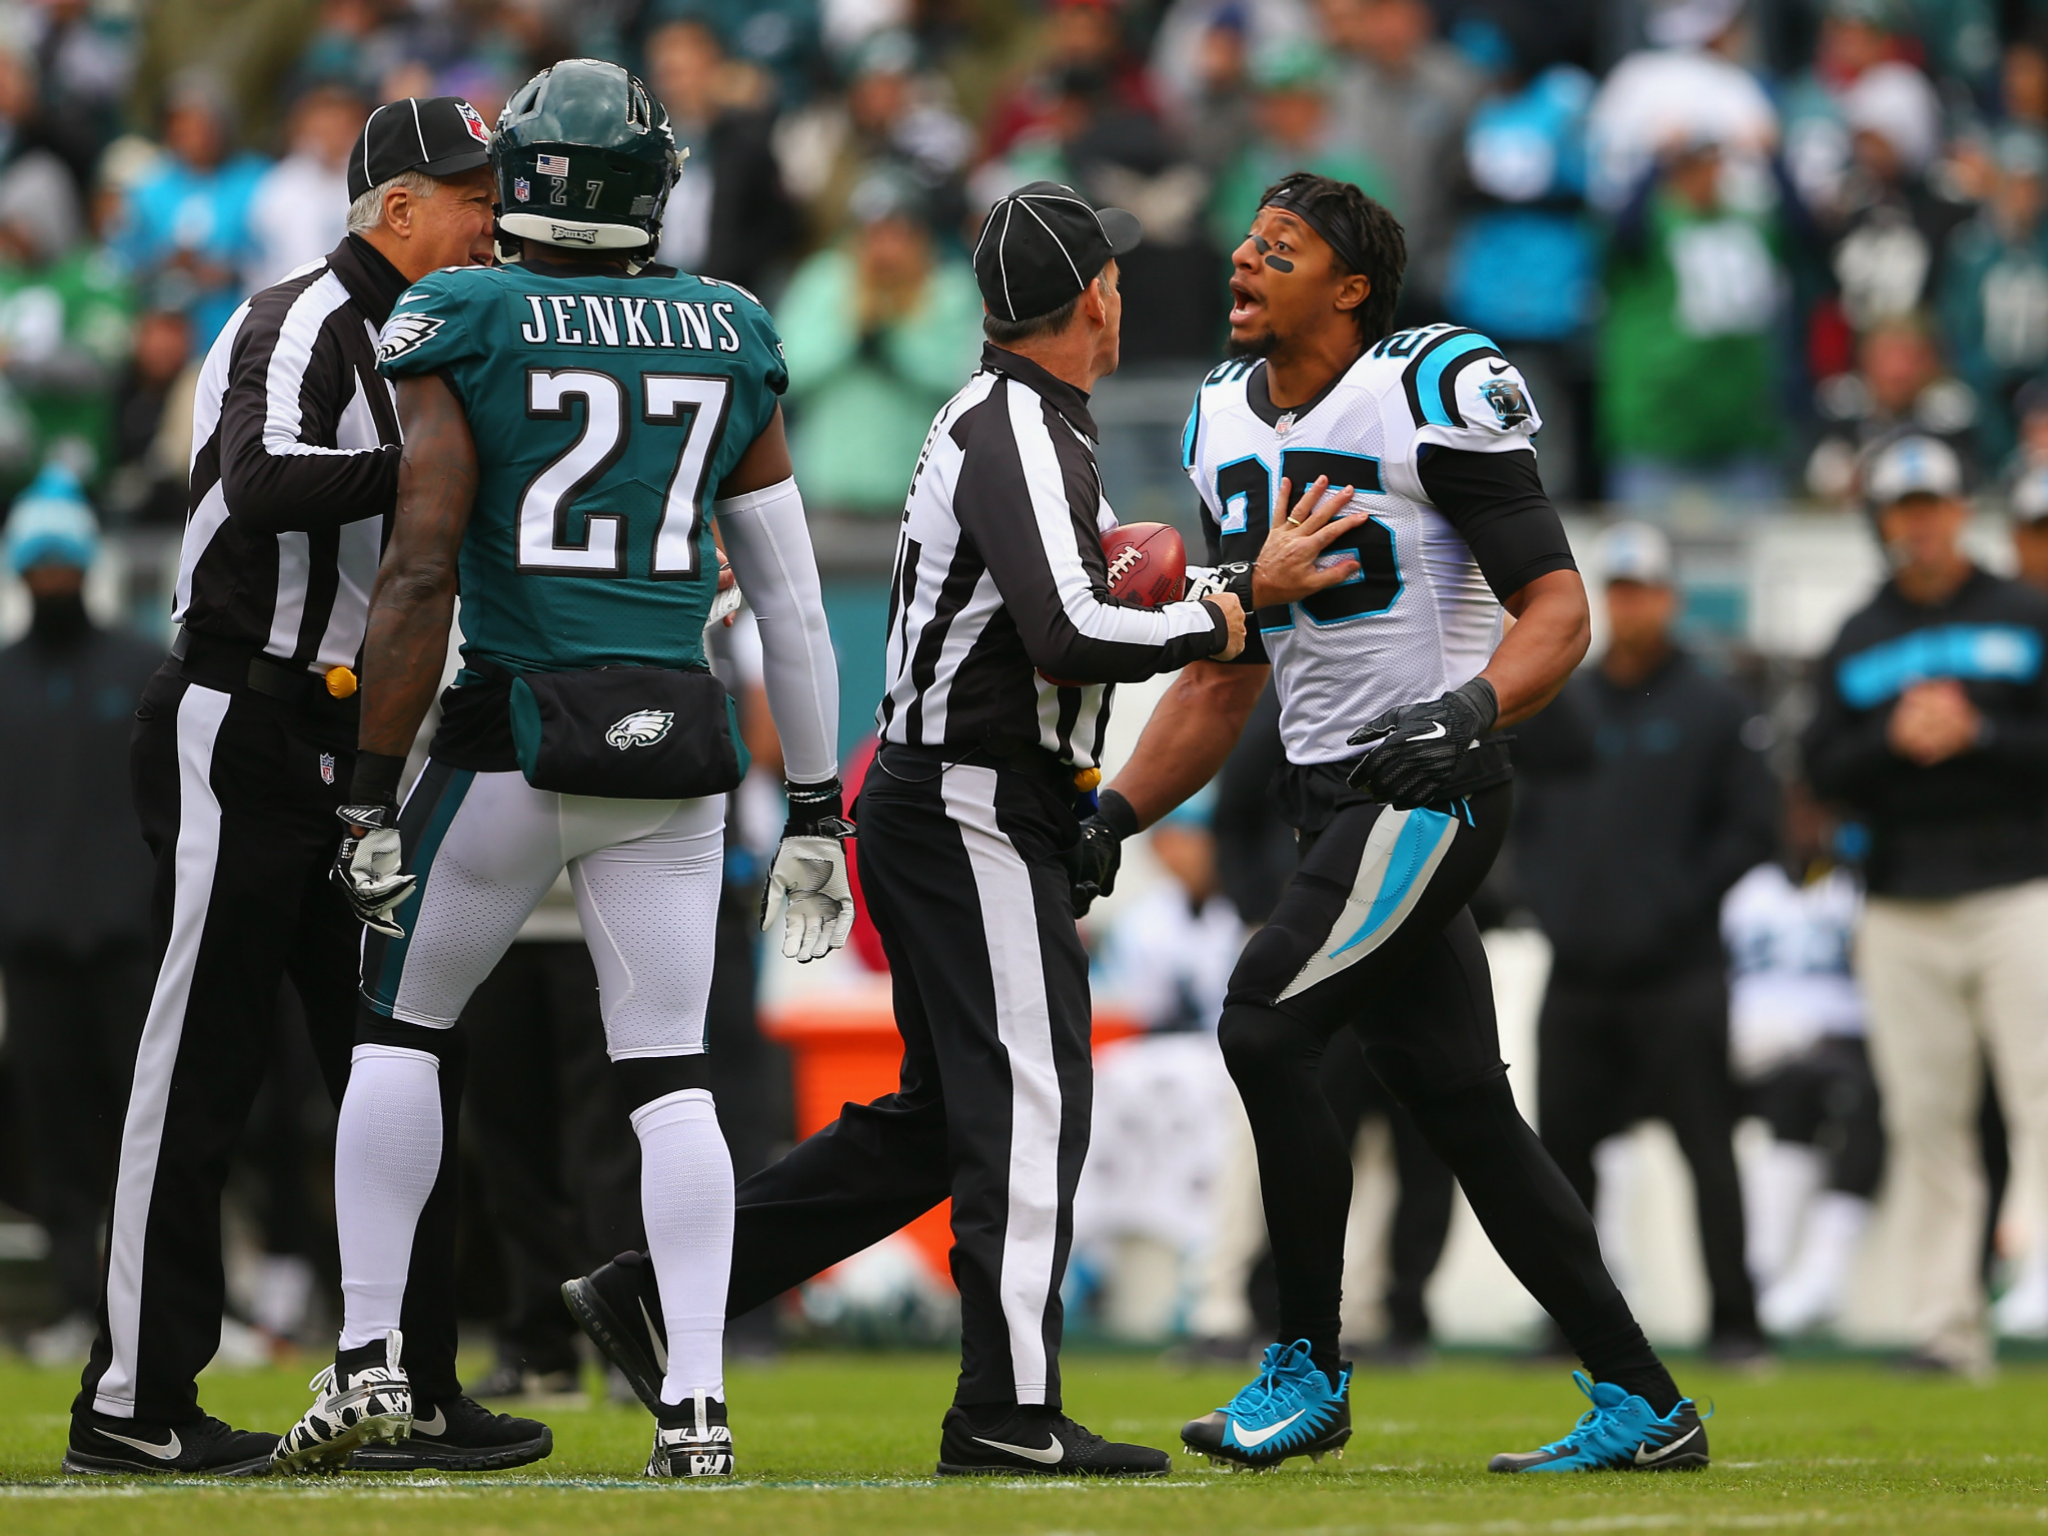 Reid confronted Jenkins before the Panthers took on the Eagles